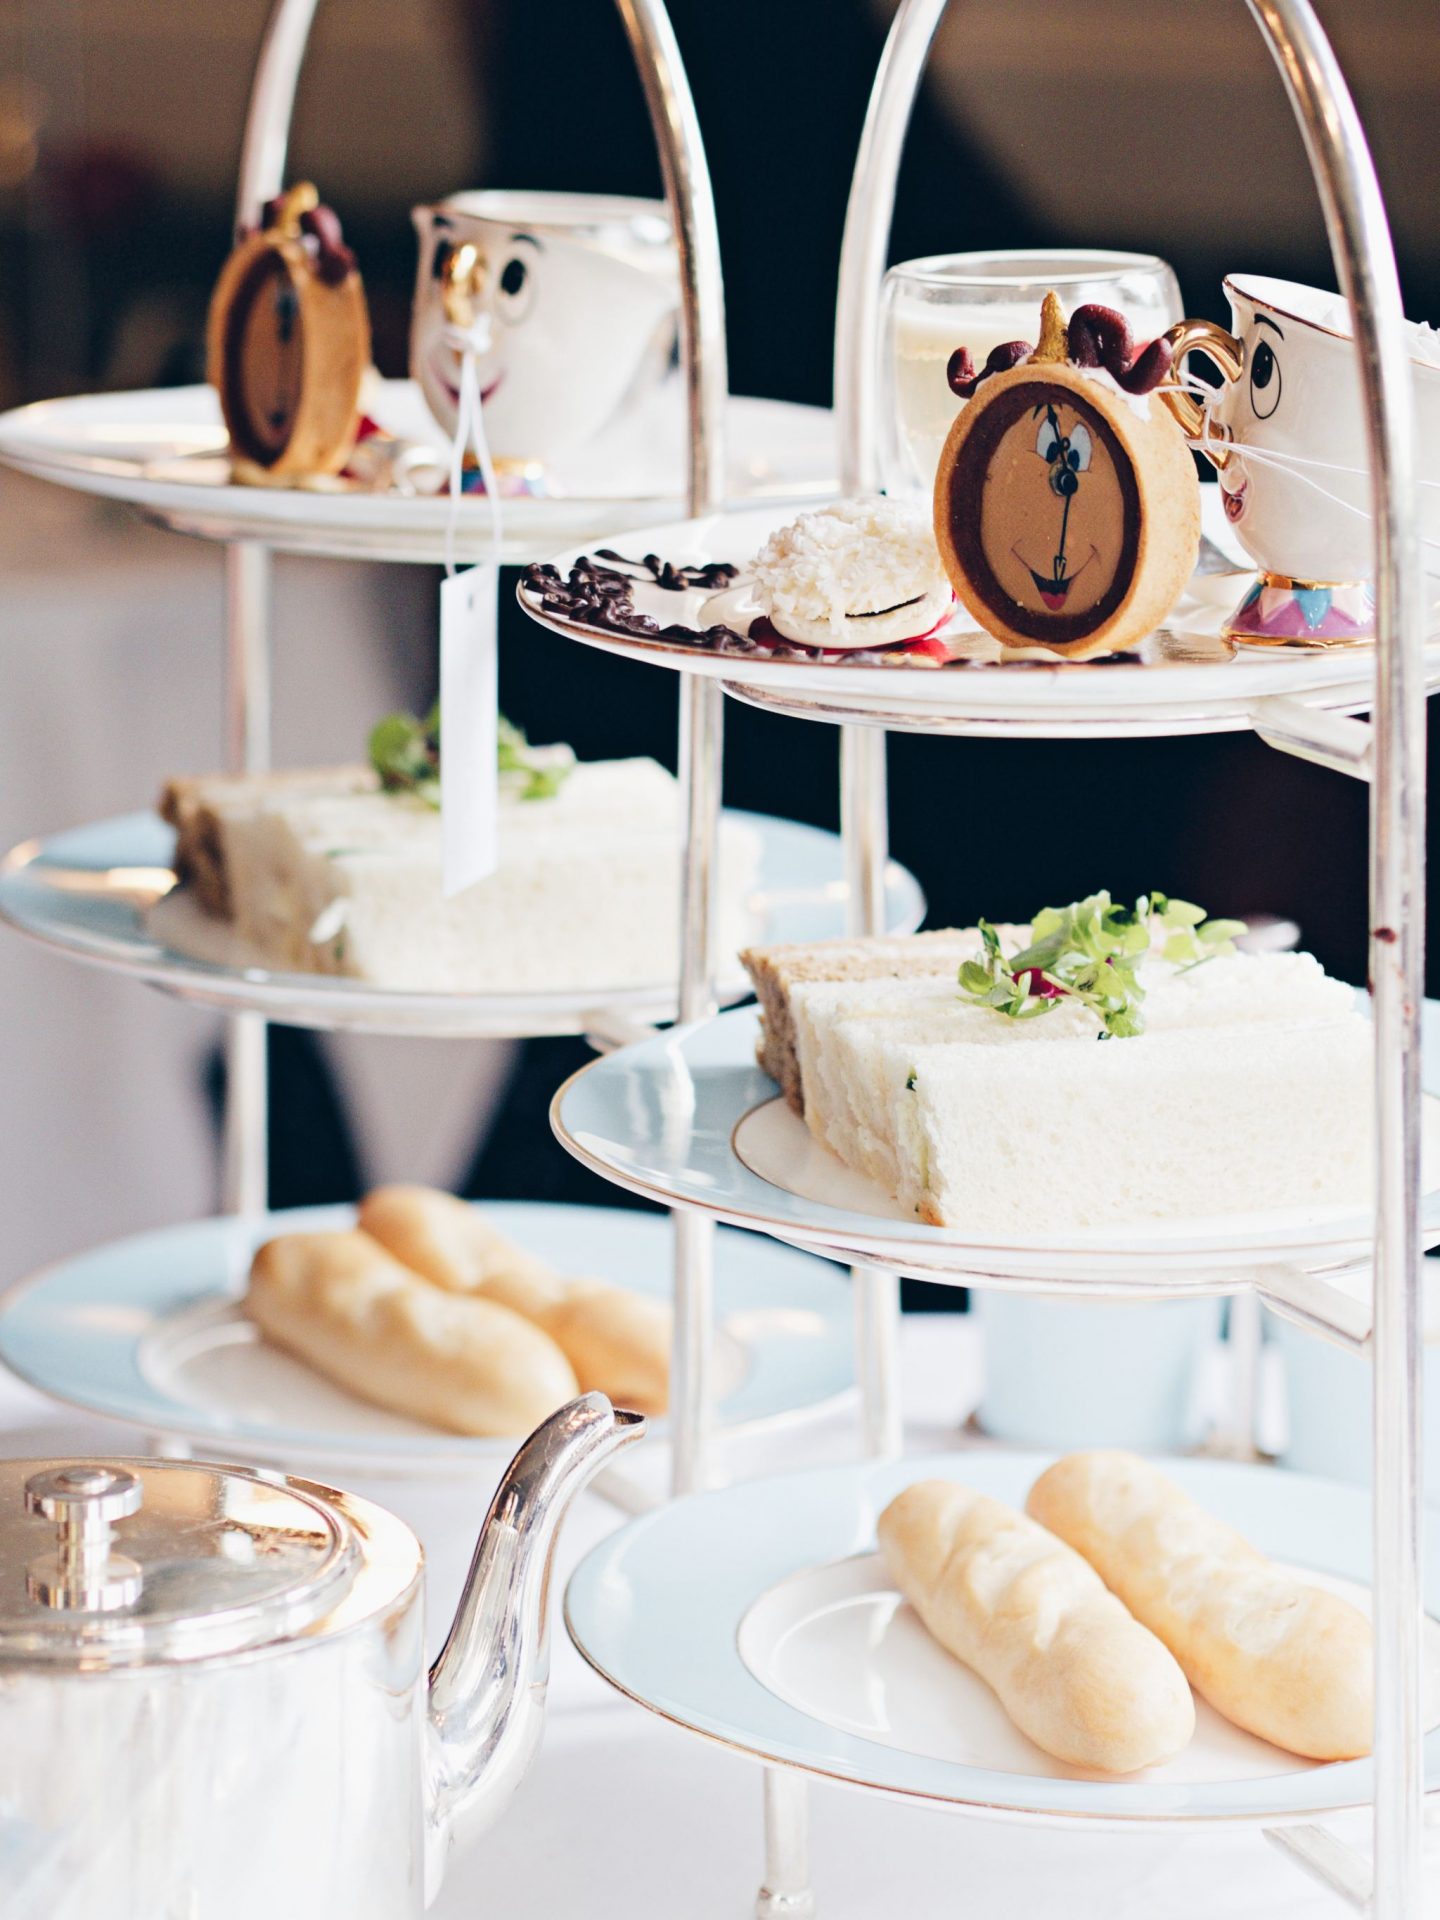 Beauty And The Beast - Tale As Old As Time Afternoon Tea